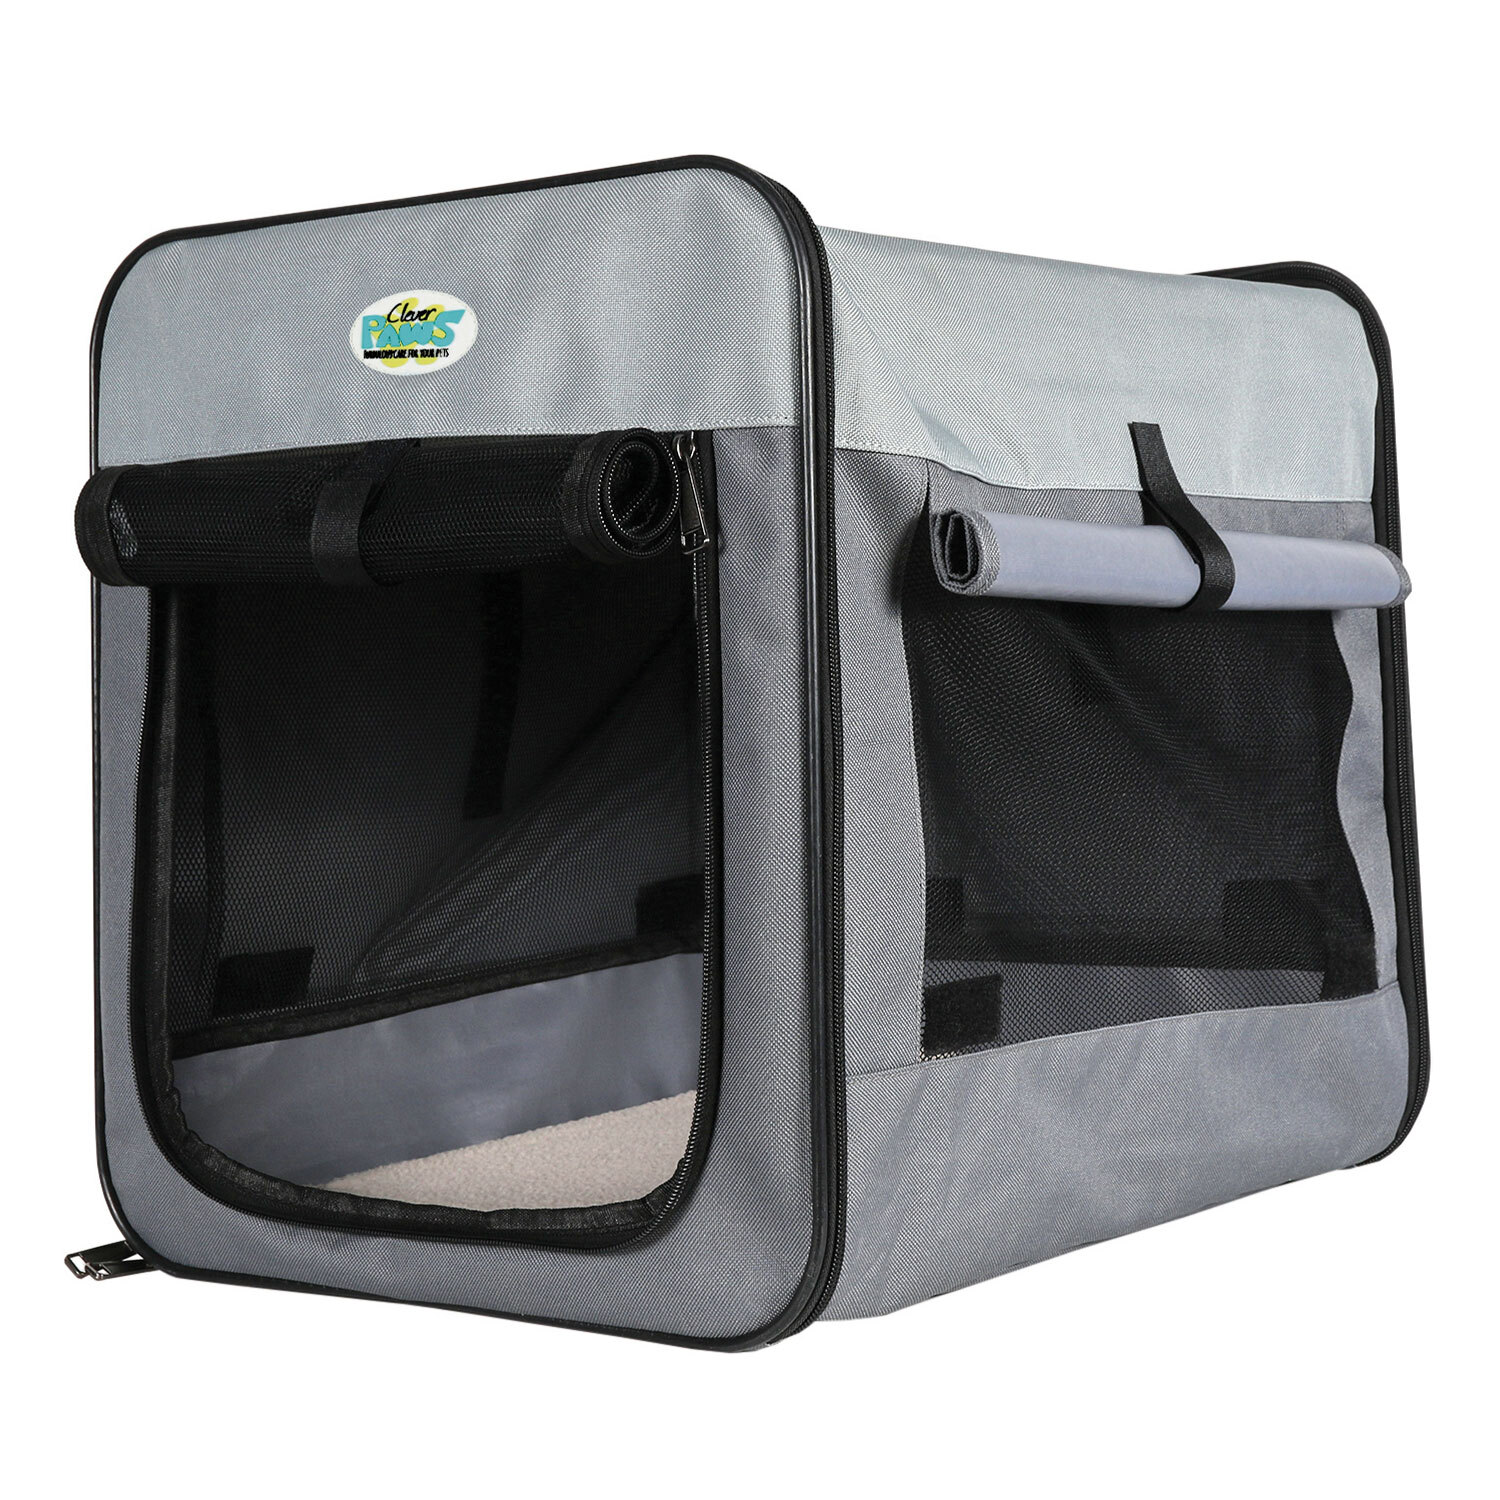 Clever Paws Medium Soft Pet Kennel Image 1